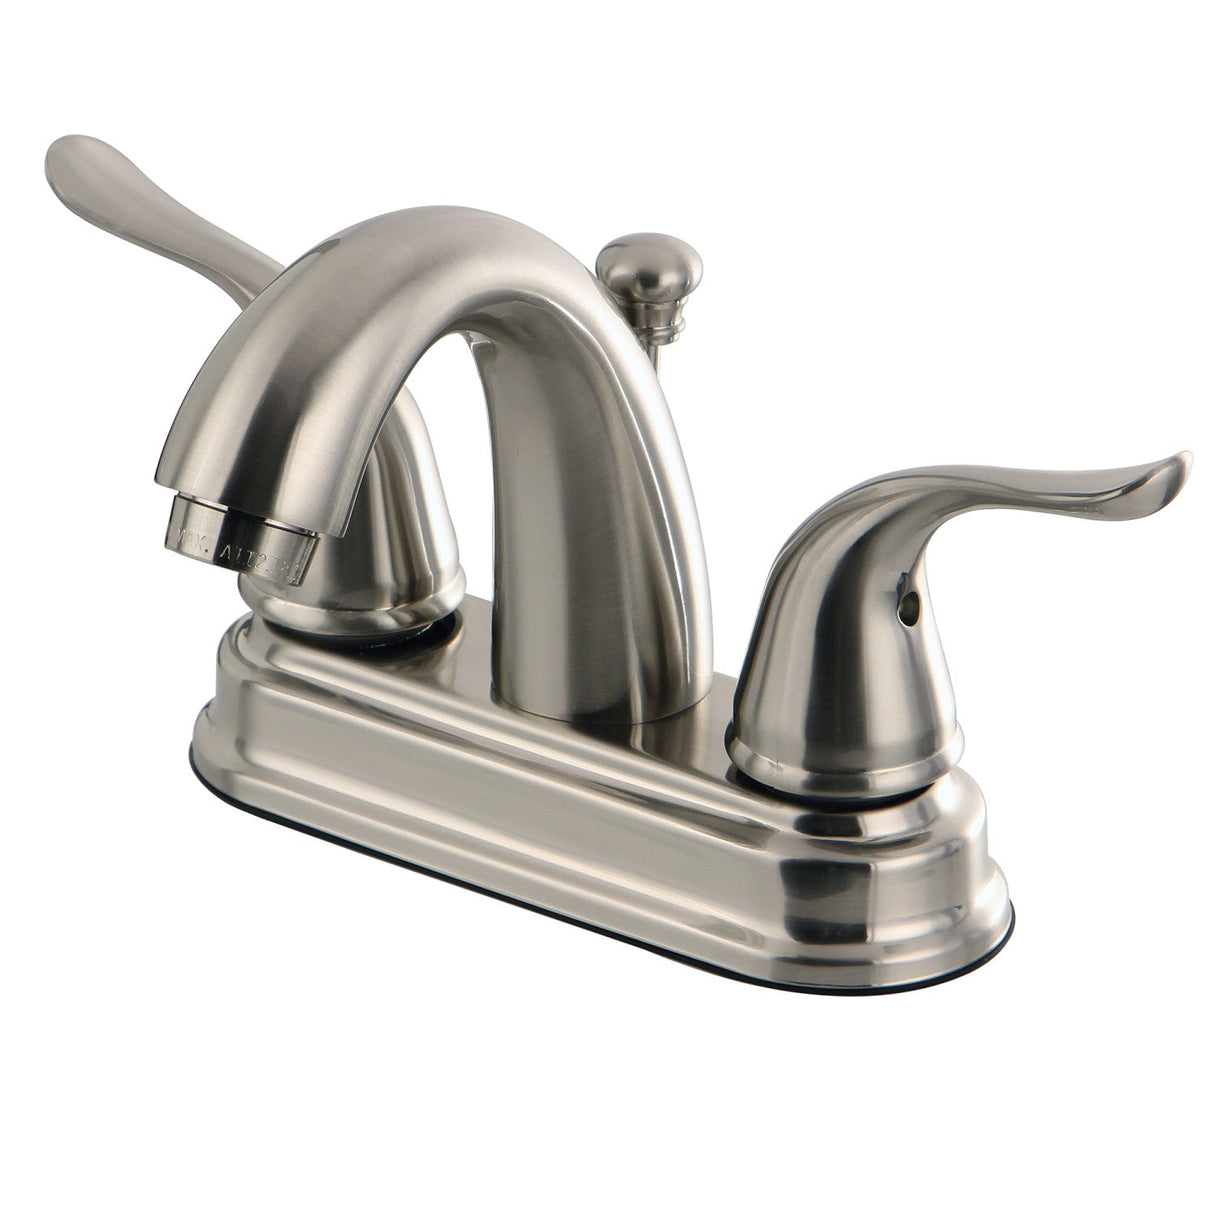 Yosemite KB5618YL Two-Handle 3-Hole Deck Mount 4" Centerset Bathroom Faucet with Plastic Pop-Up, Brushed Nickel